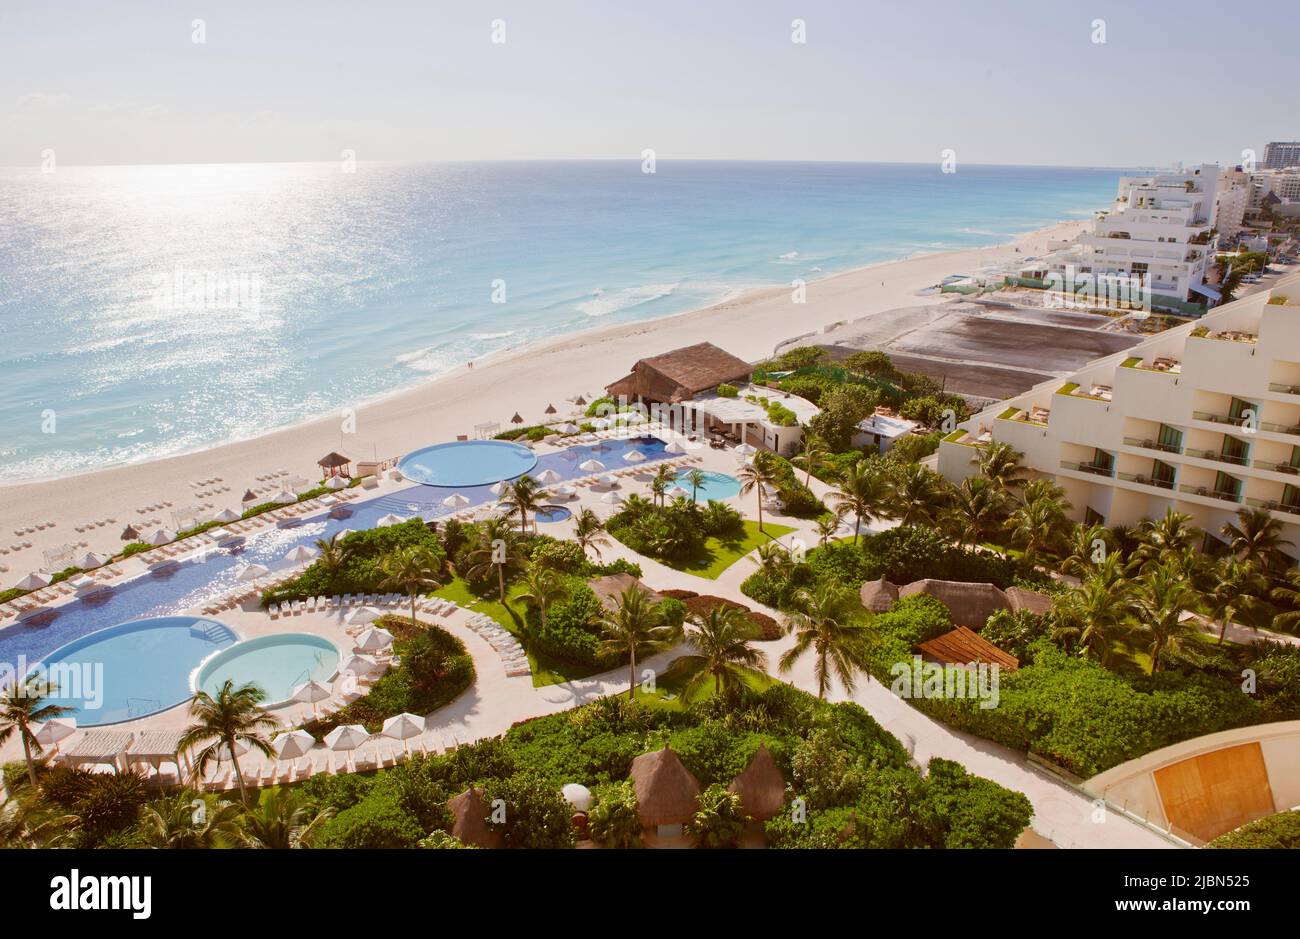 The view from Room 3016 at Live Aqua Resort & Spa, a 371-room luxury all-inclusive hotel located in Cancun’s Hotel Zone. Cancun, Quintana Roo, Mexico. Stock Photo